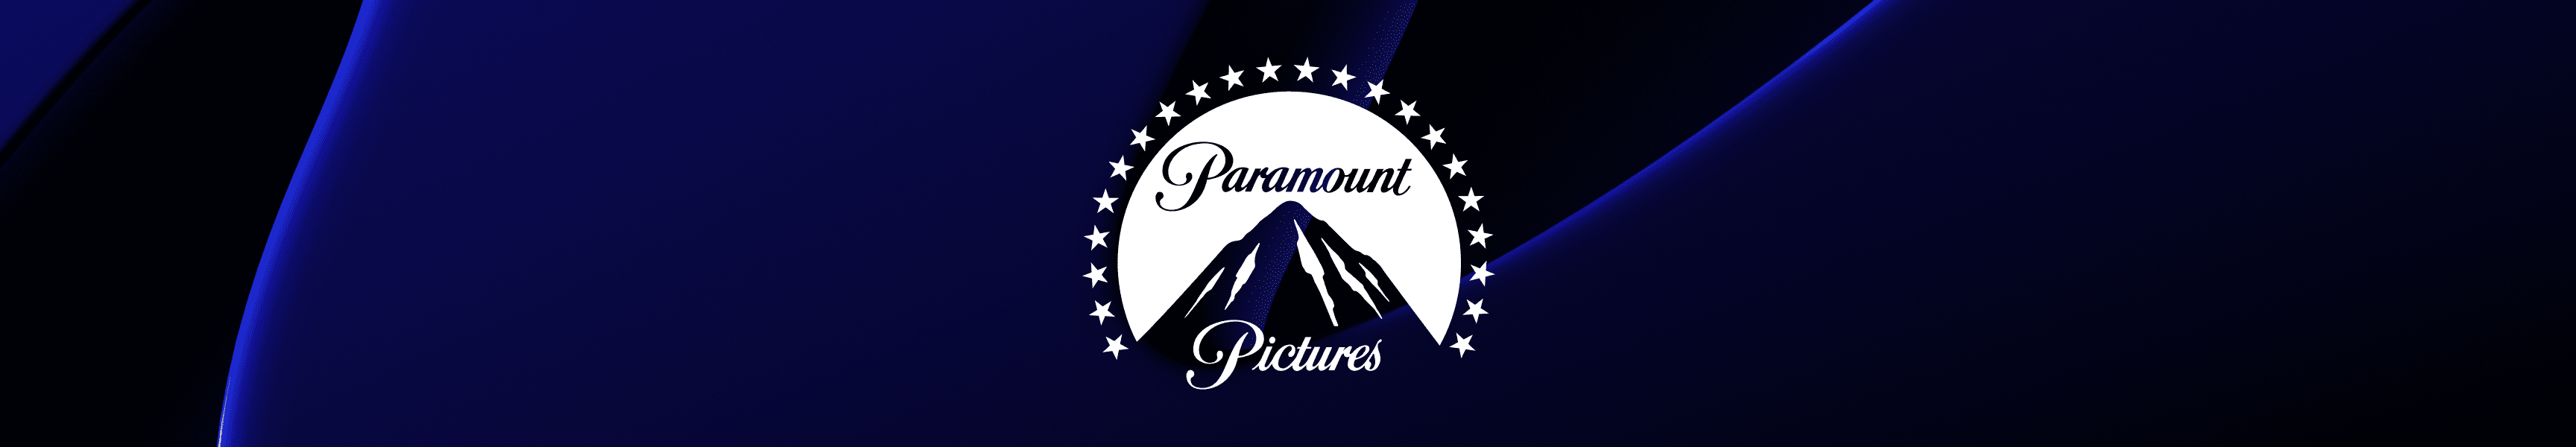 Paramount Pictures Blankets